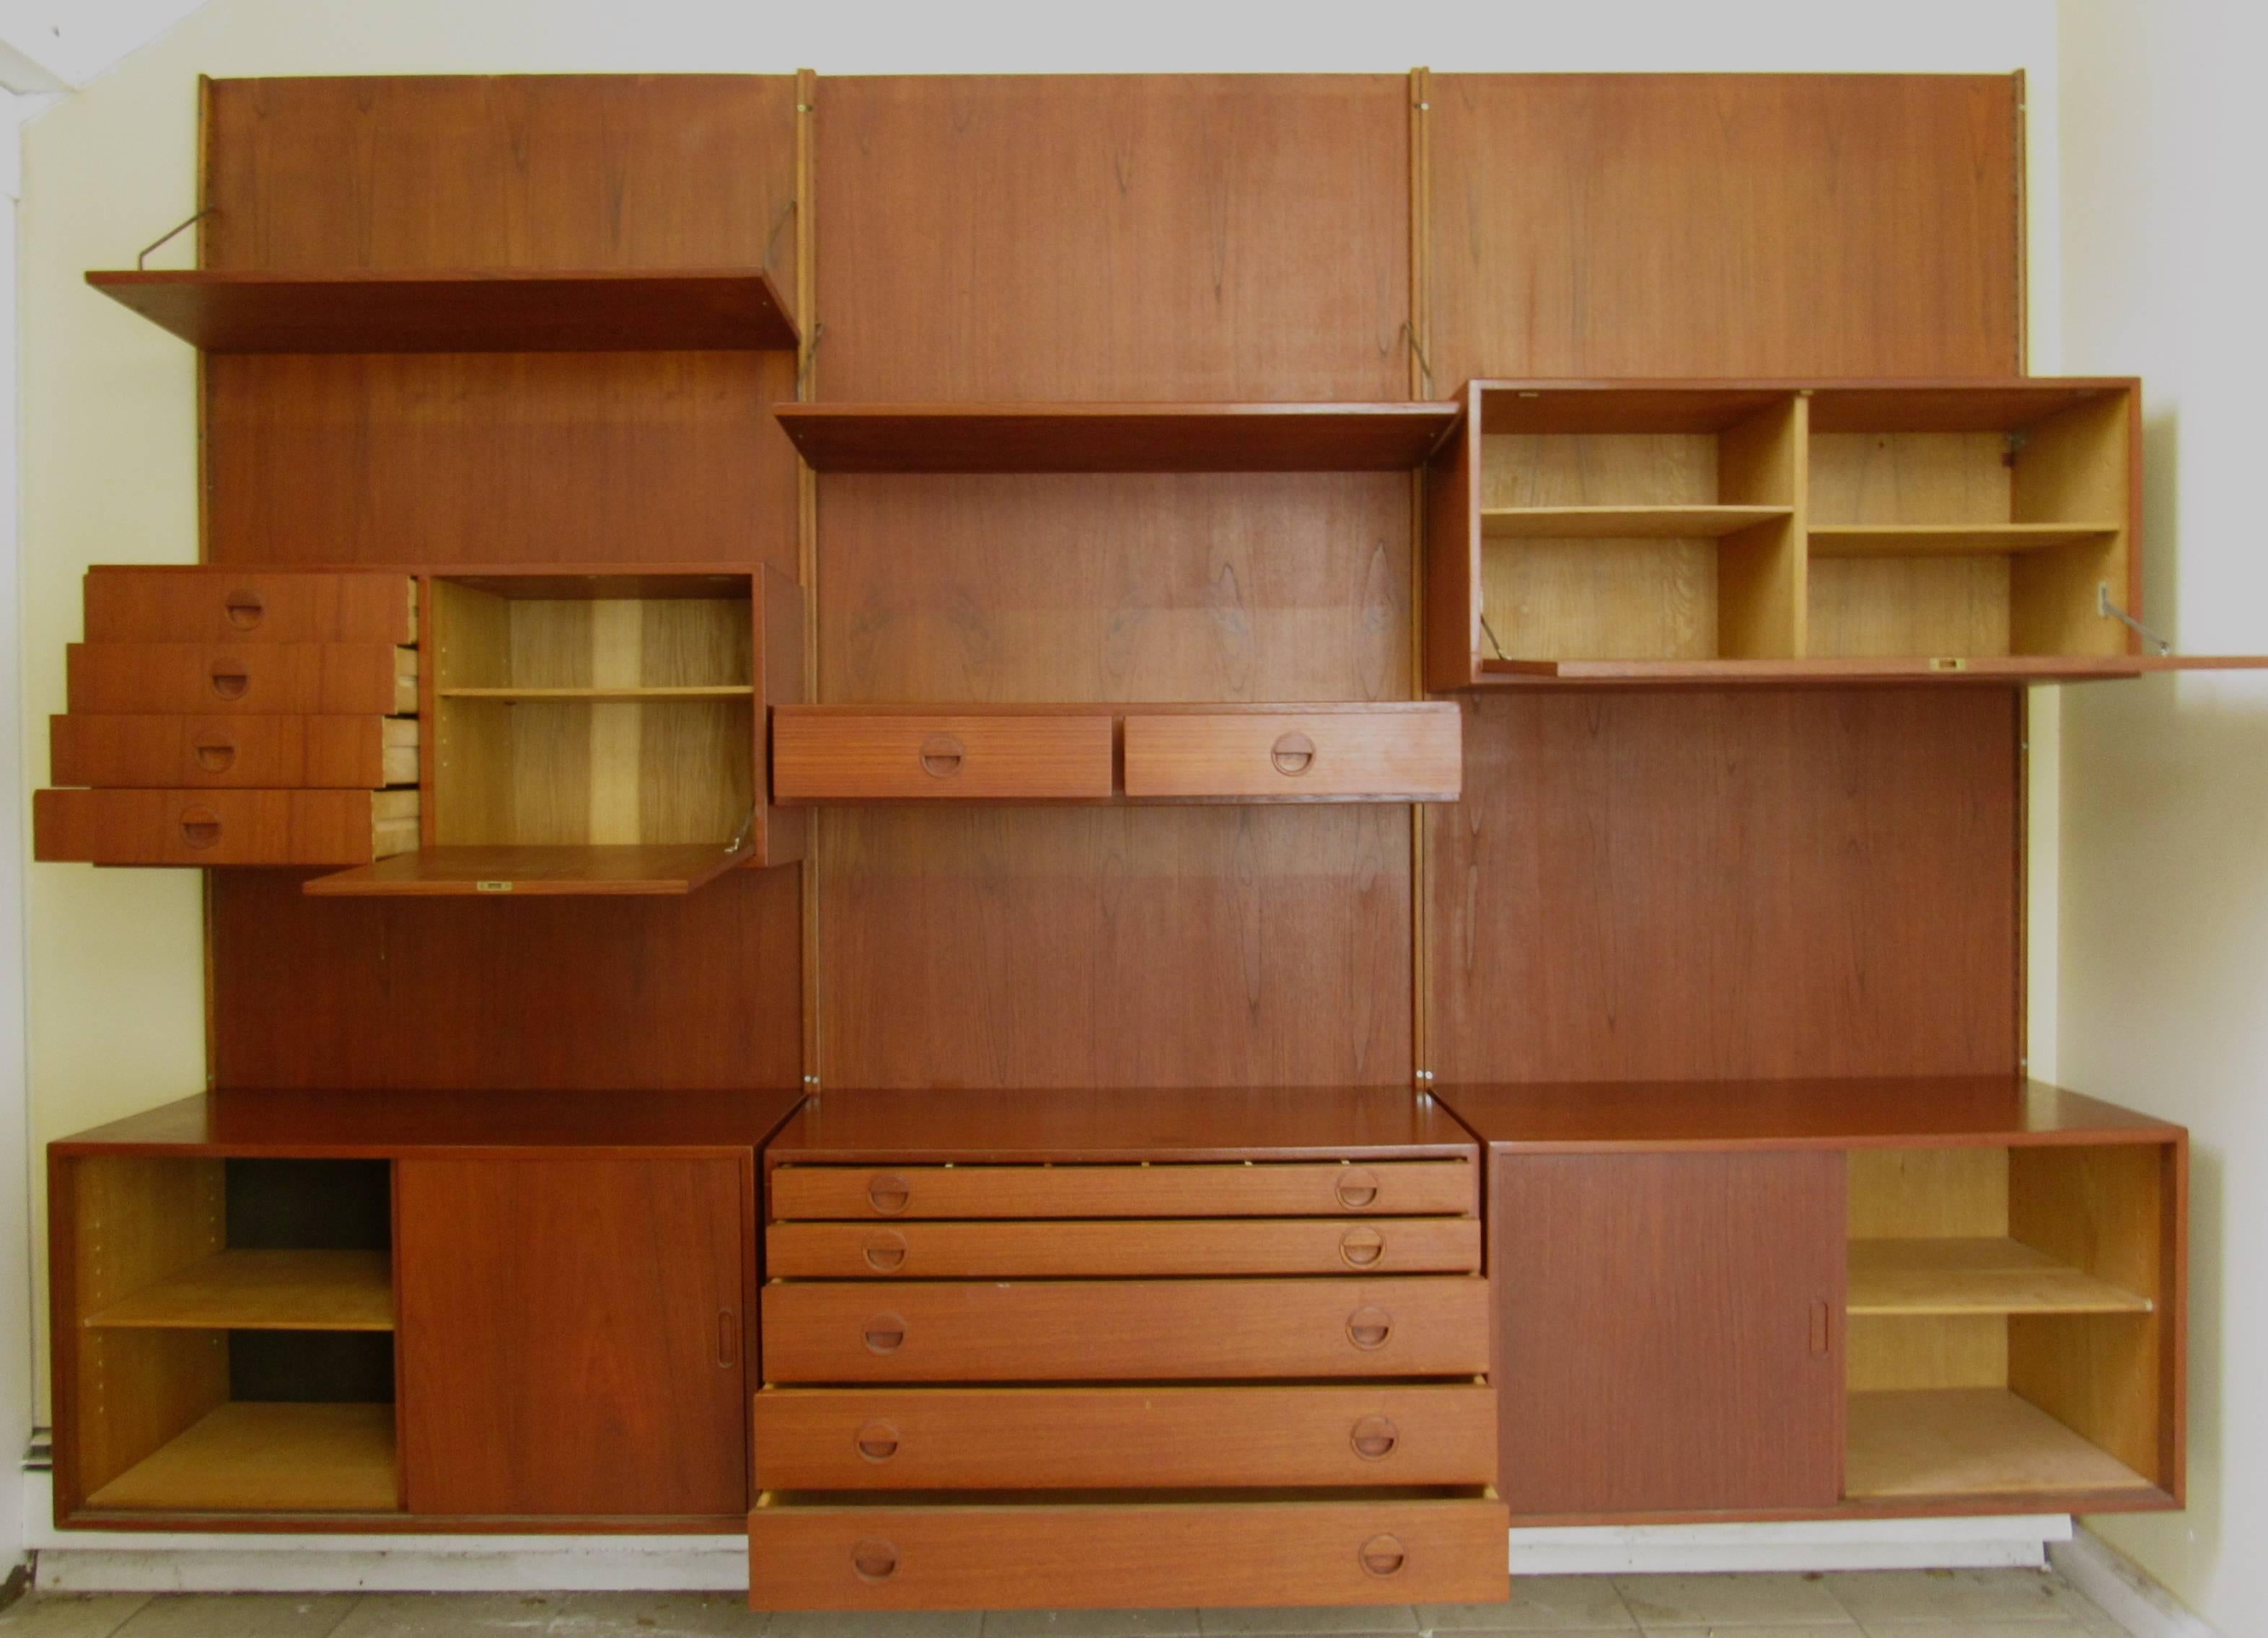 This vintage teak wall unit features three-panel backsplash with modular cabinets whose arrangement can be customized. Ideal wall shelving for dining room or shop display, features storage and shelf space perfect for Mid-Century interiors. Please